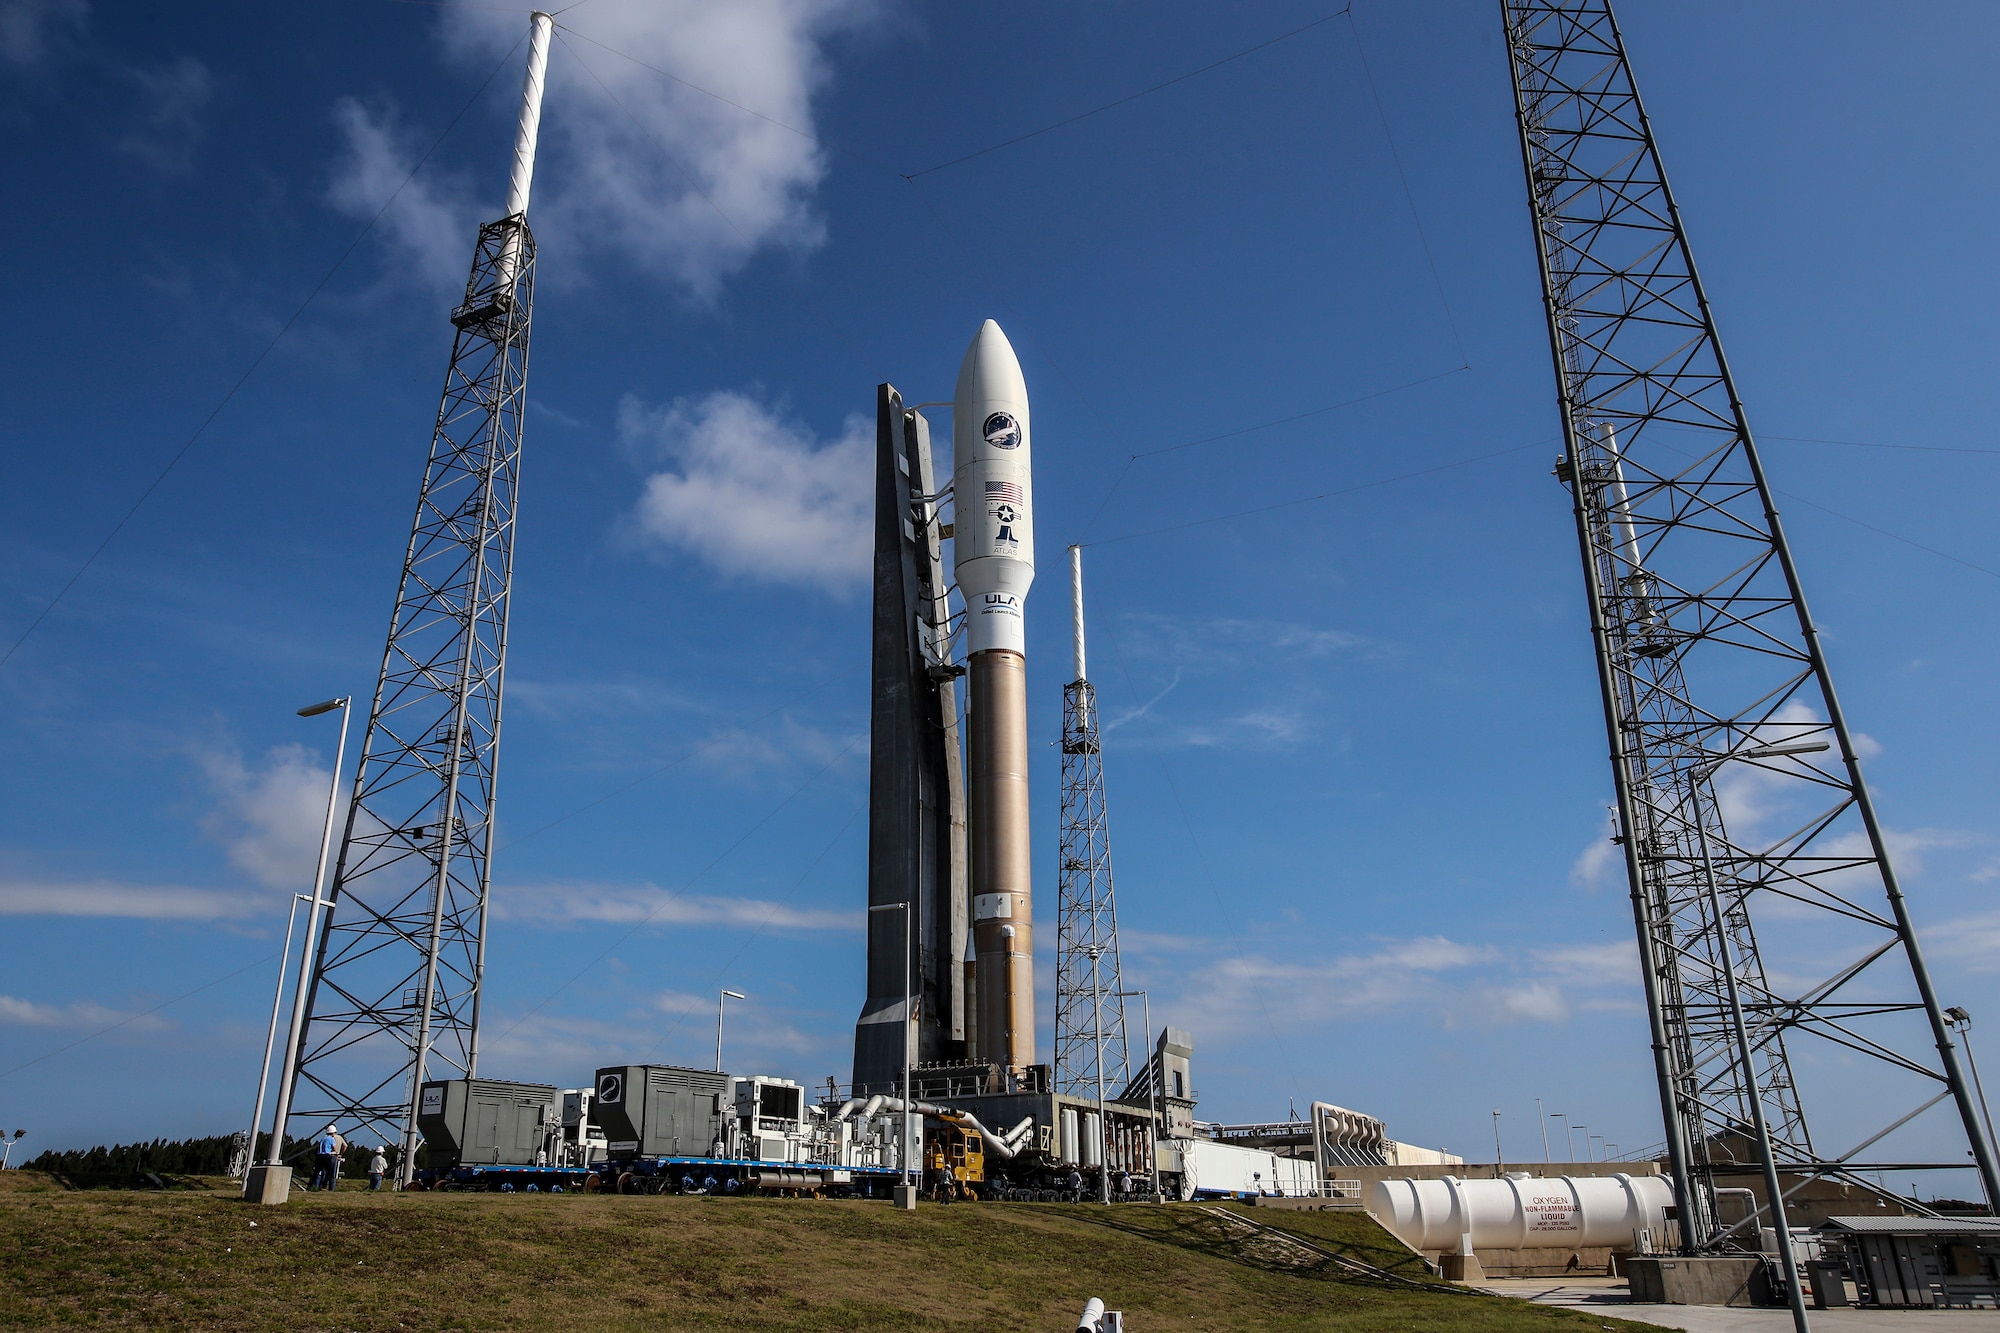 The 45th Space Wing successfully launched a United Launch Alliance-built Atlas V Evolved Expendable Launch Vehicle at 11:05 a.m. EDT, May 20, 2015, from Space Launch Complex 41 at Cape Canaveral Air Force Station, Fla. The Atlas V rocket carried into Low Earth Orbit an X-37B Orbital Test Vehicle (OTV), marking the fourth space flight for the X-37B program. (Photo/United Launch Alliance) 
